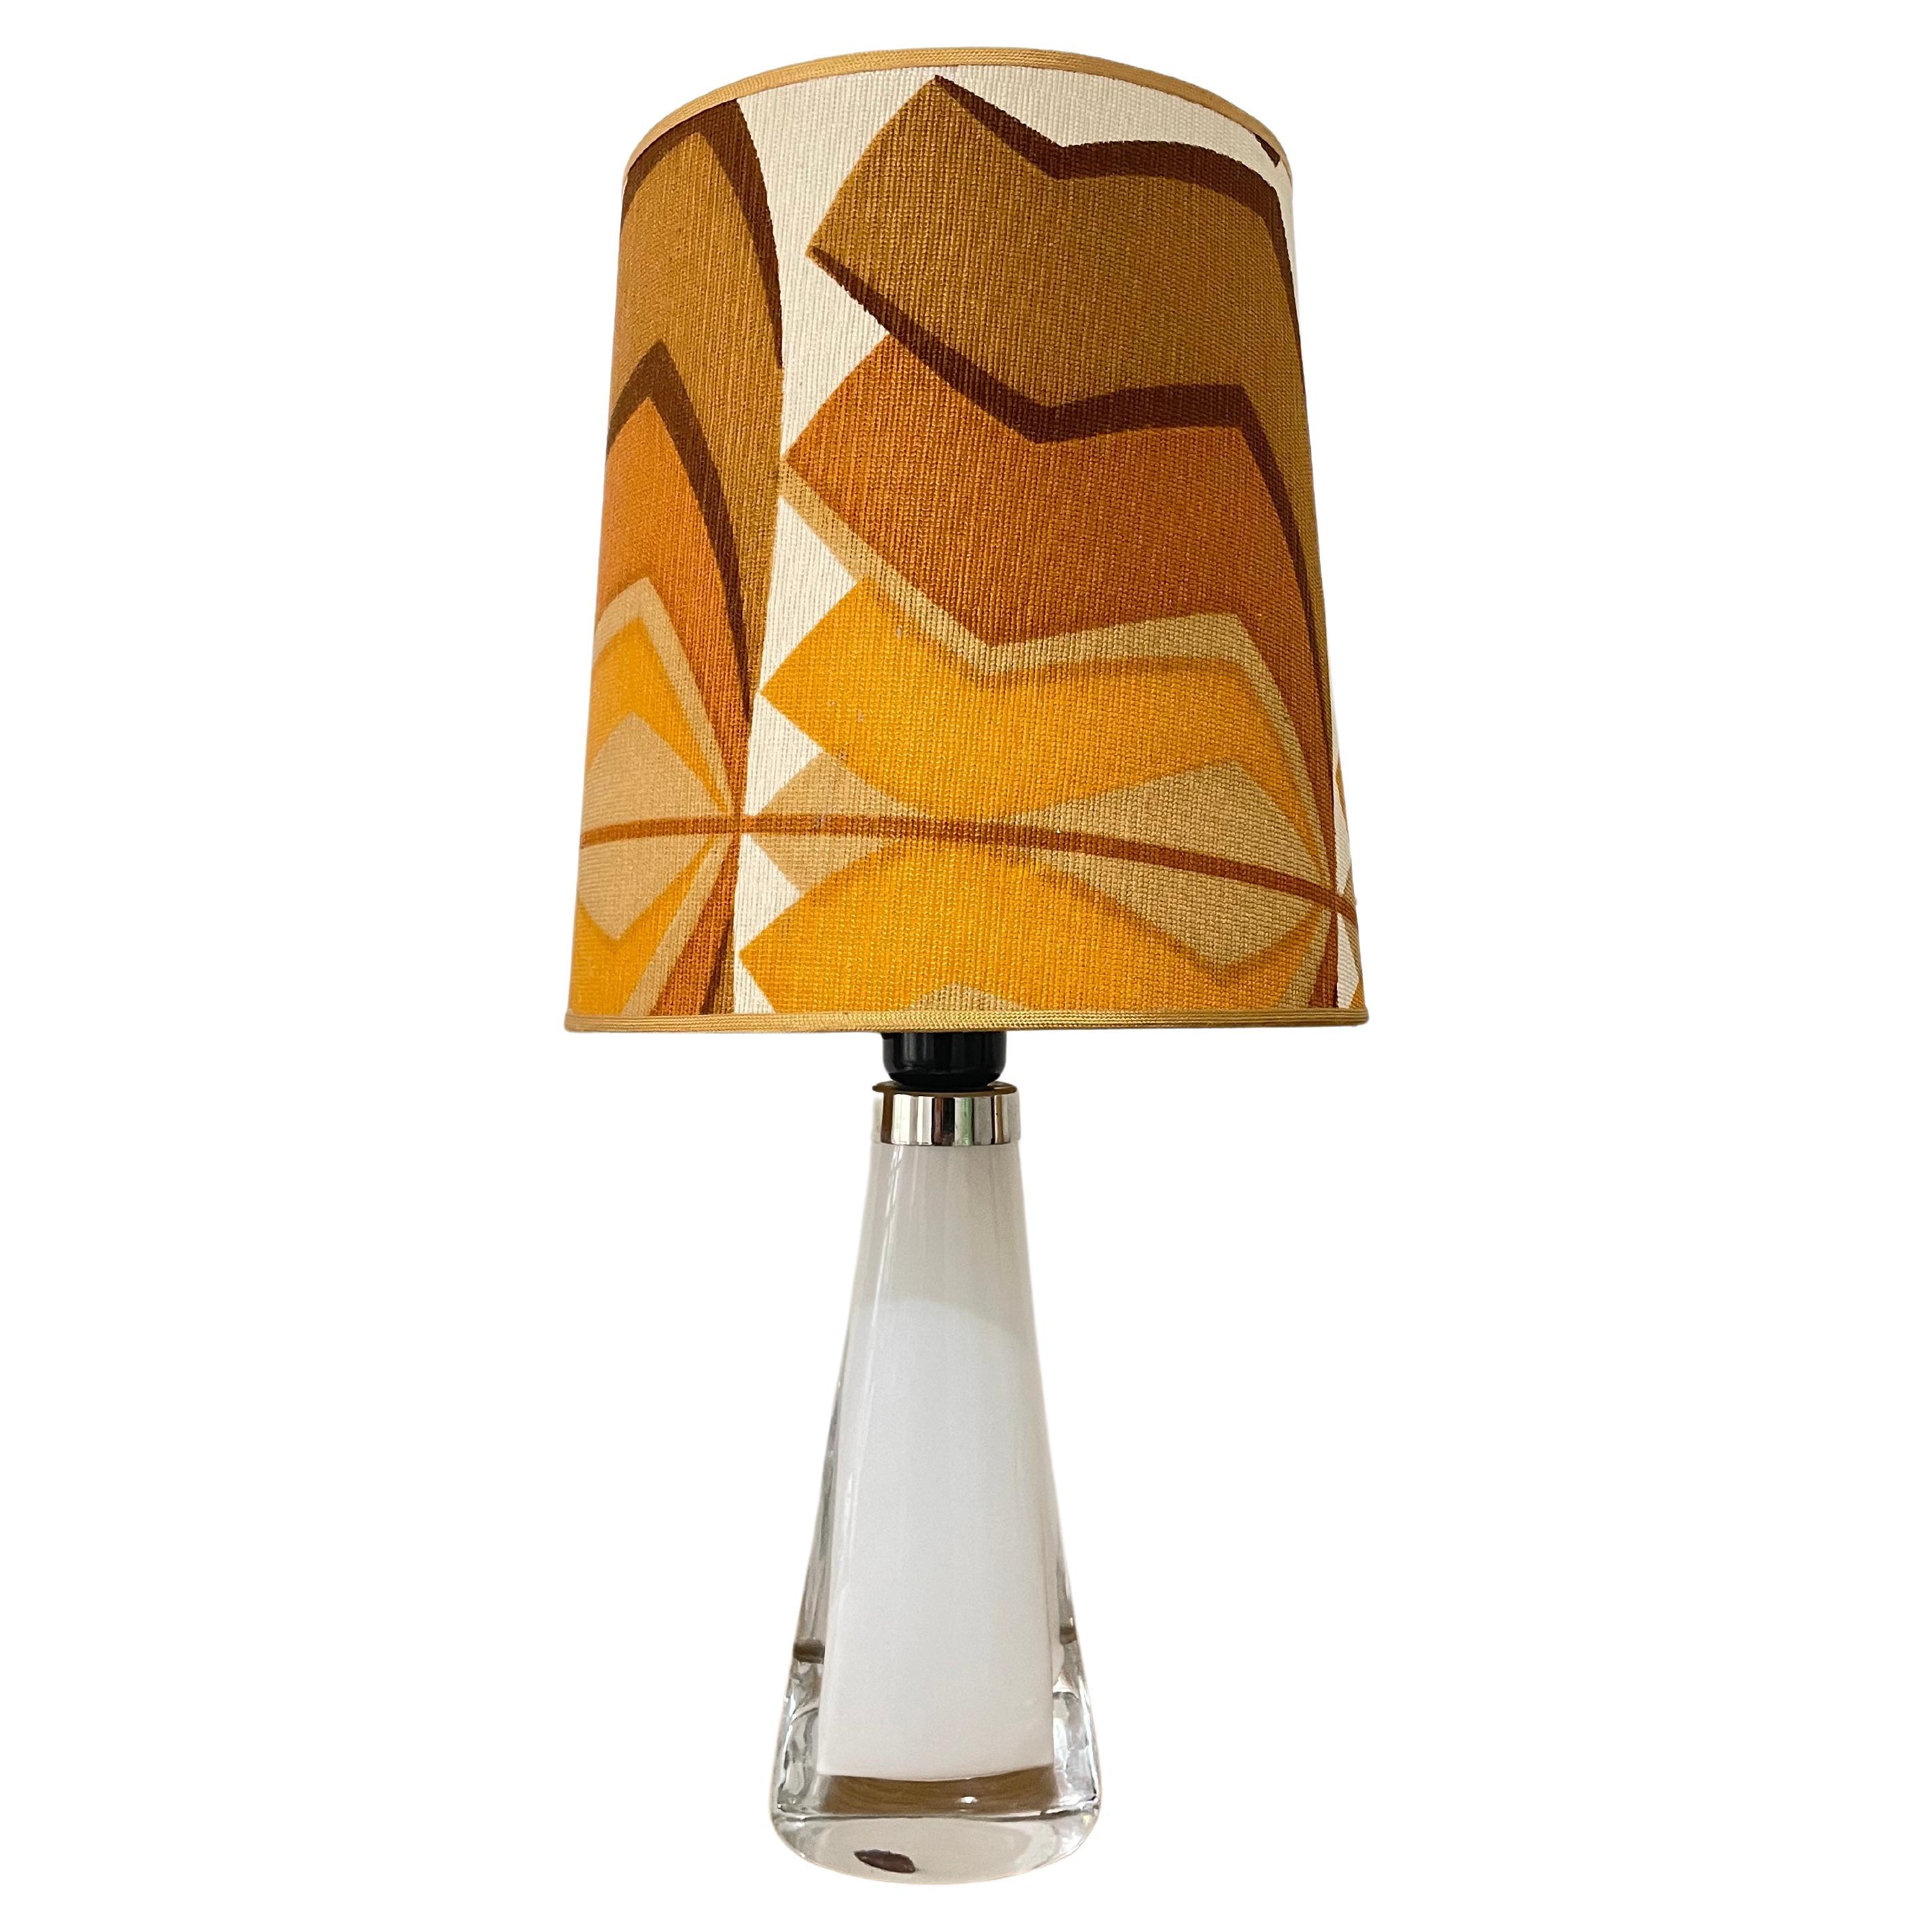 RD 1566 tablelamp by Carl Fagerlund for Orrefors. 1950's